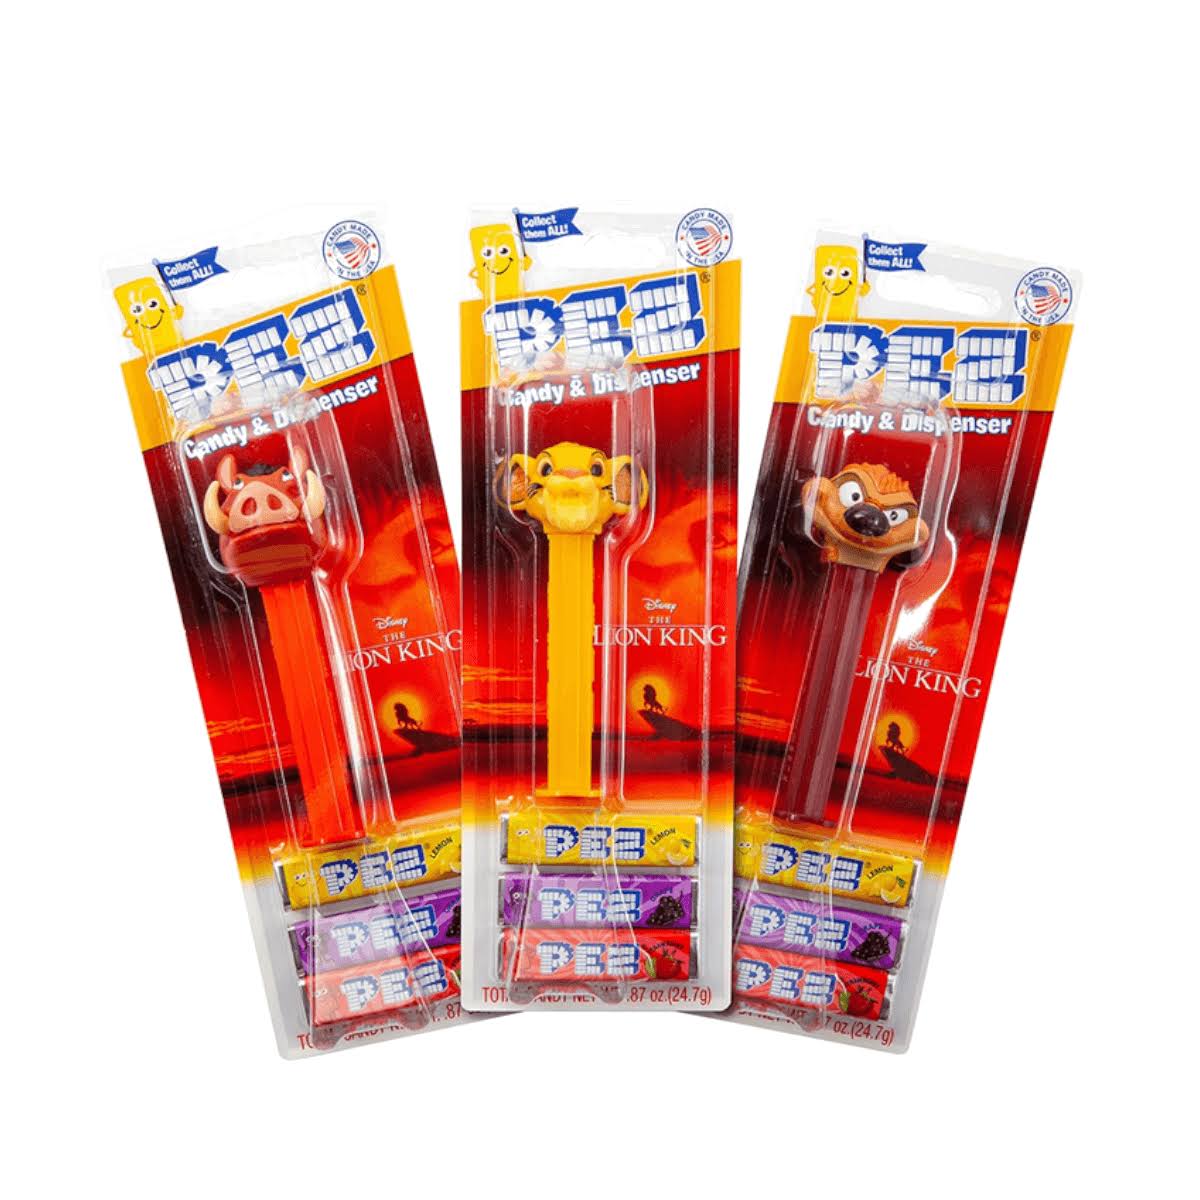 Pez Lion King + 3 Candy Tablet Packs - 24.7g